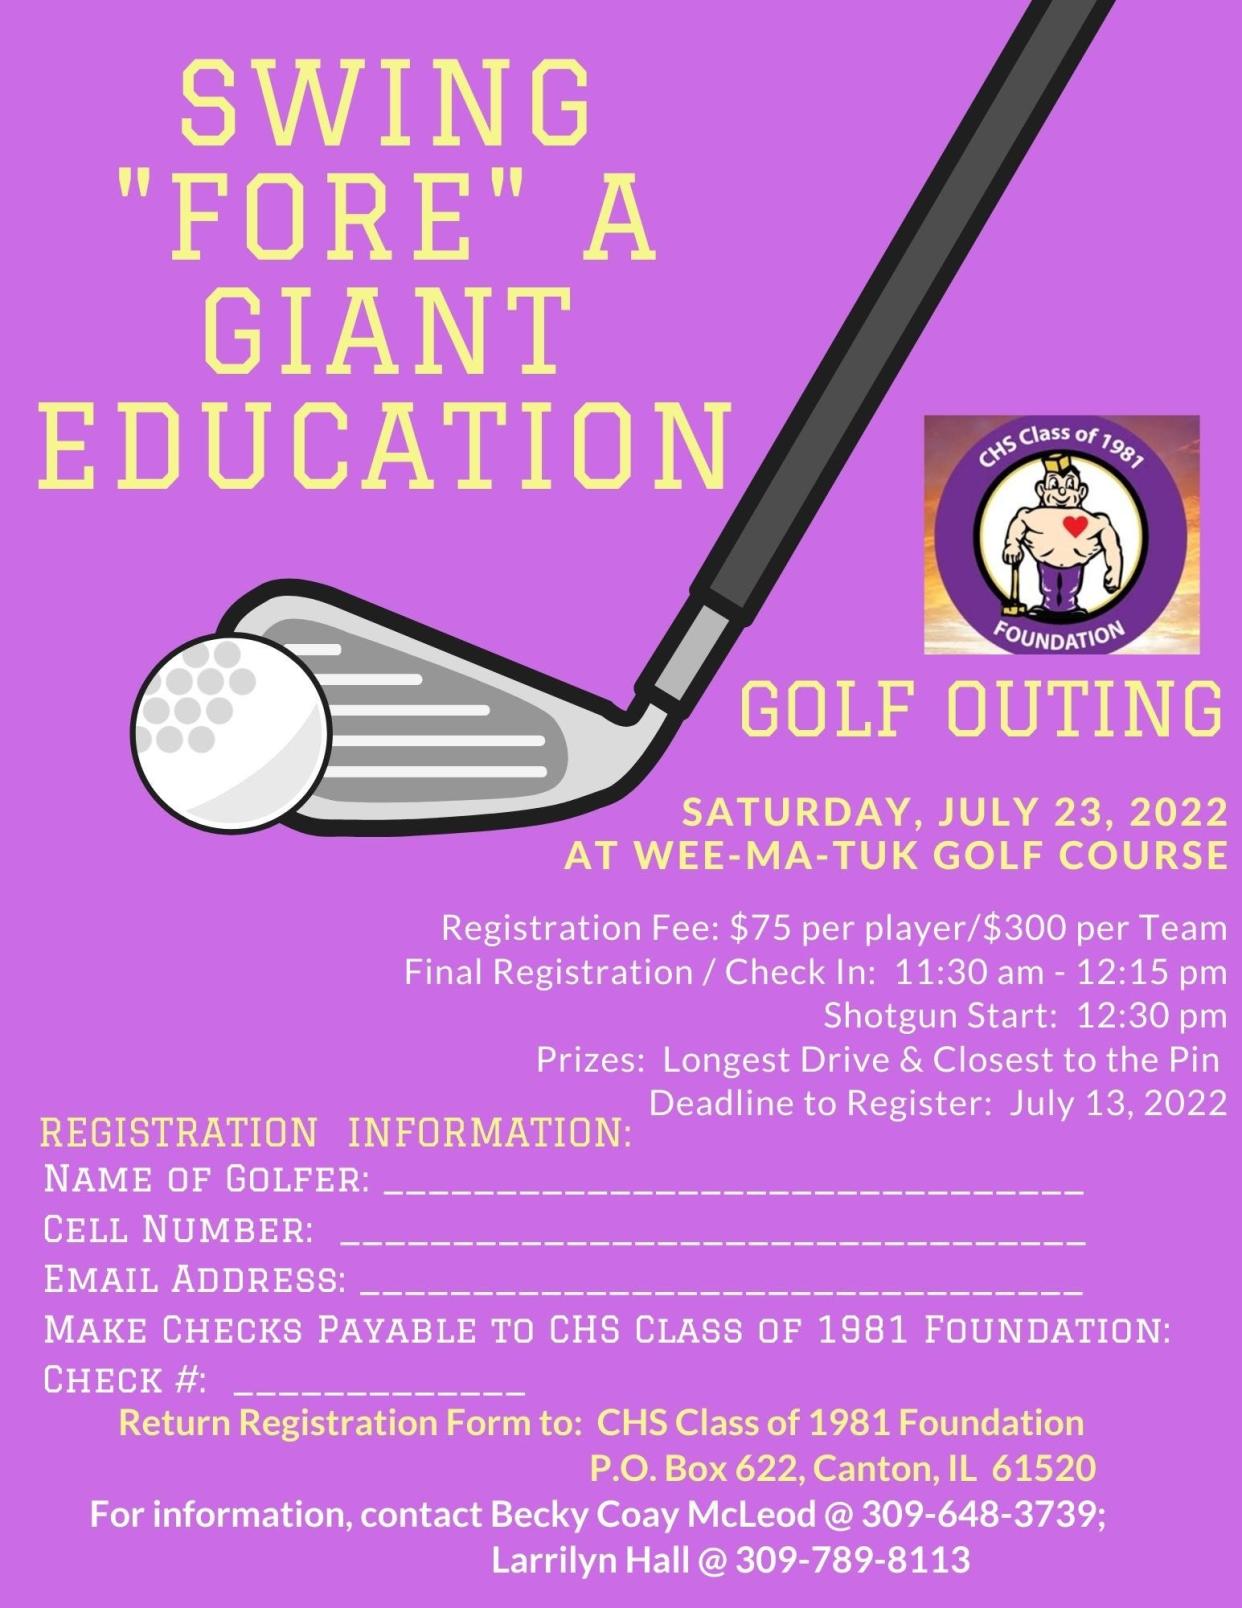 The Canton High School Class of 1981 Foundation will be holding a charity golf outing at Wee-Ma-Tuk Hills Country Club  Saturday, July 23.